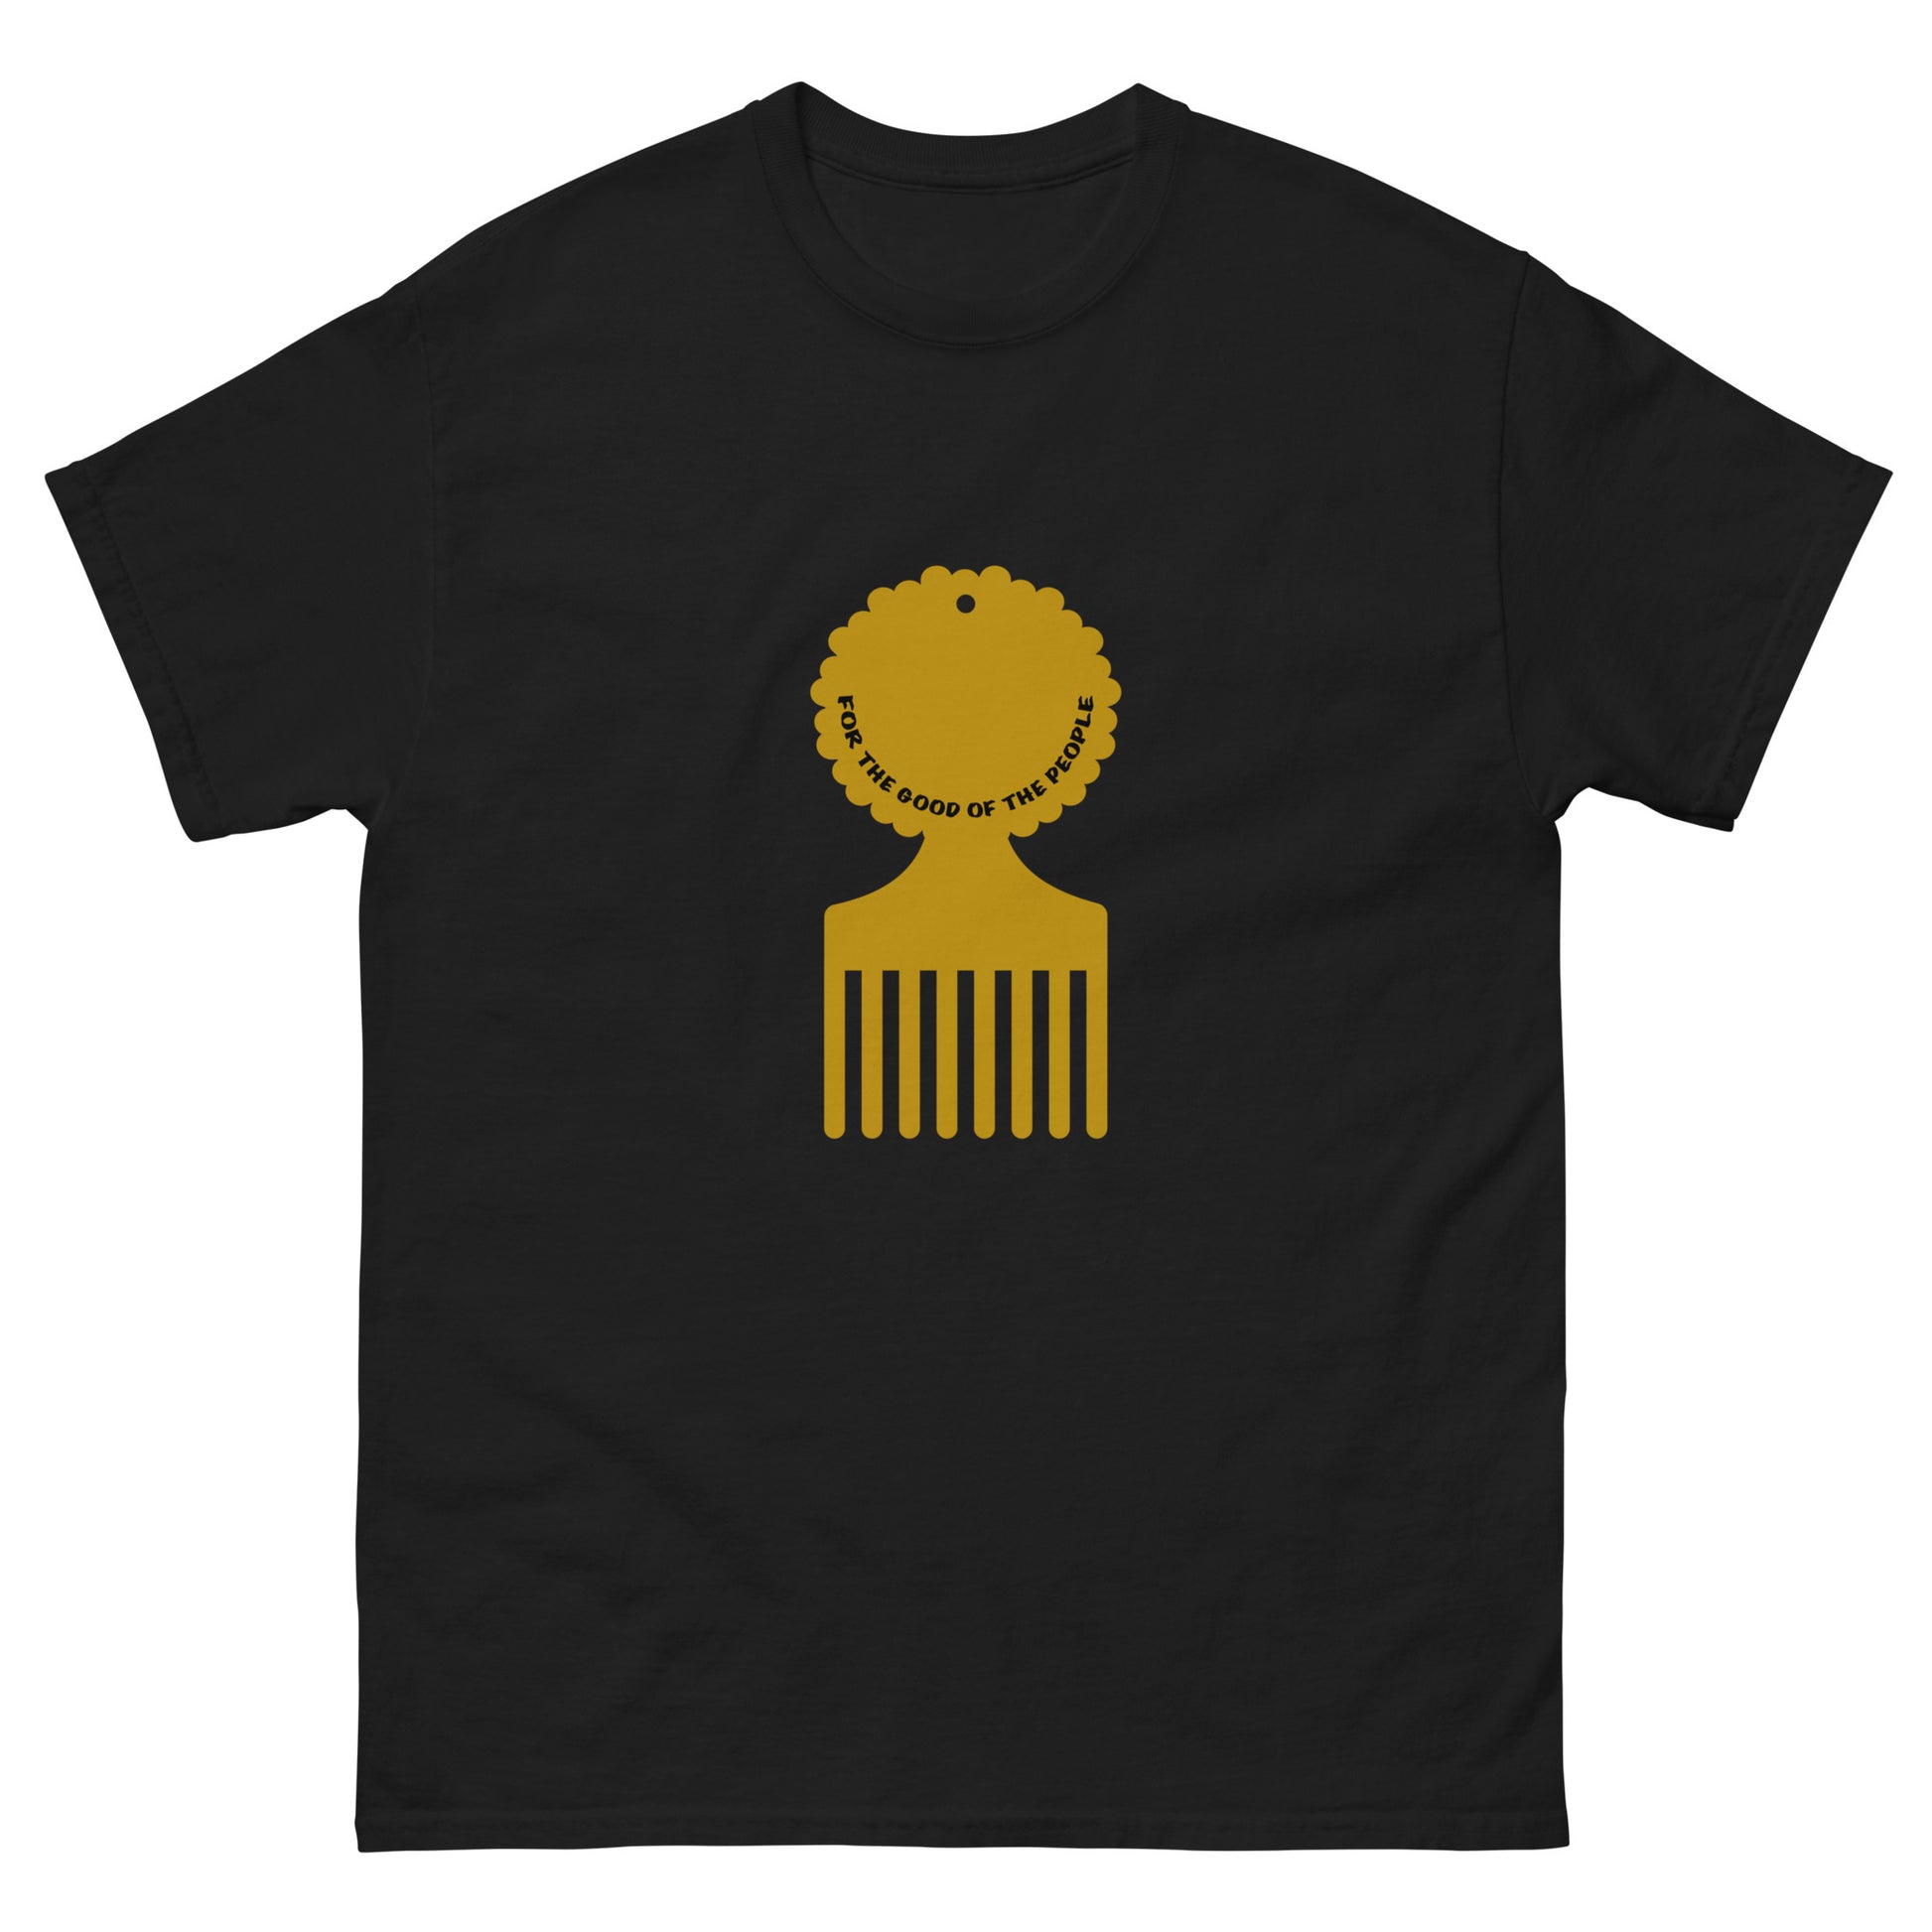 Men's black tee with gold afro pick in the center of shirt, with for the good of the people in black inside the afro pick's handle.